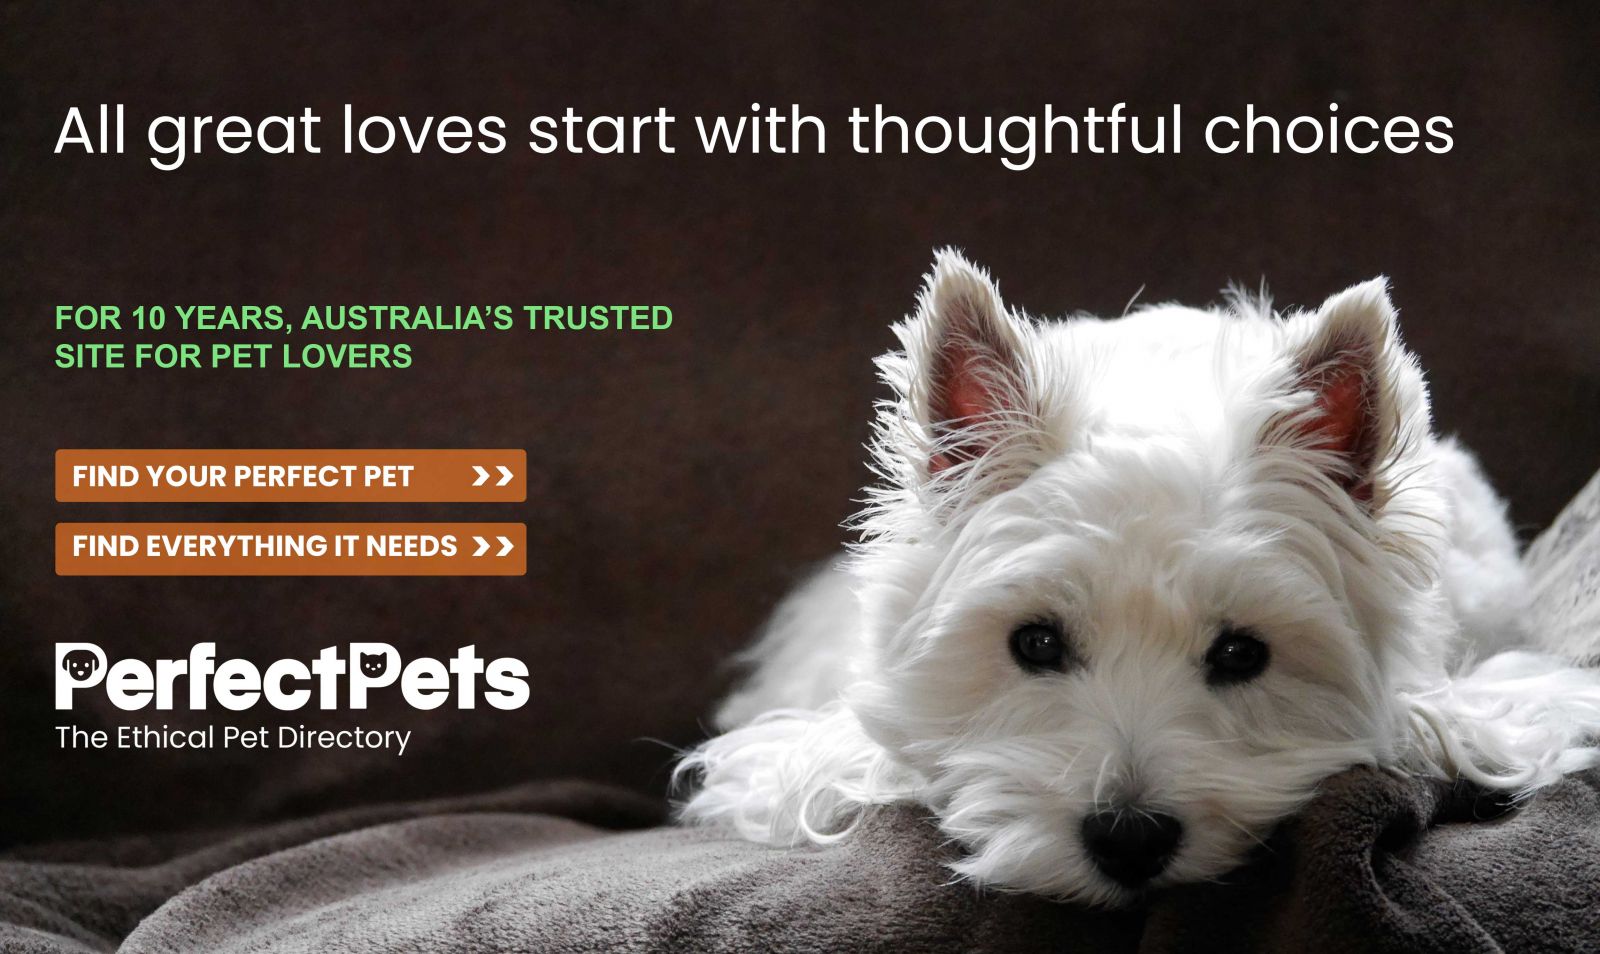 Perfect Pets - The Ethical Pet Directory